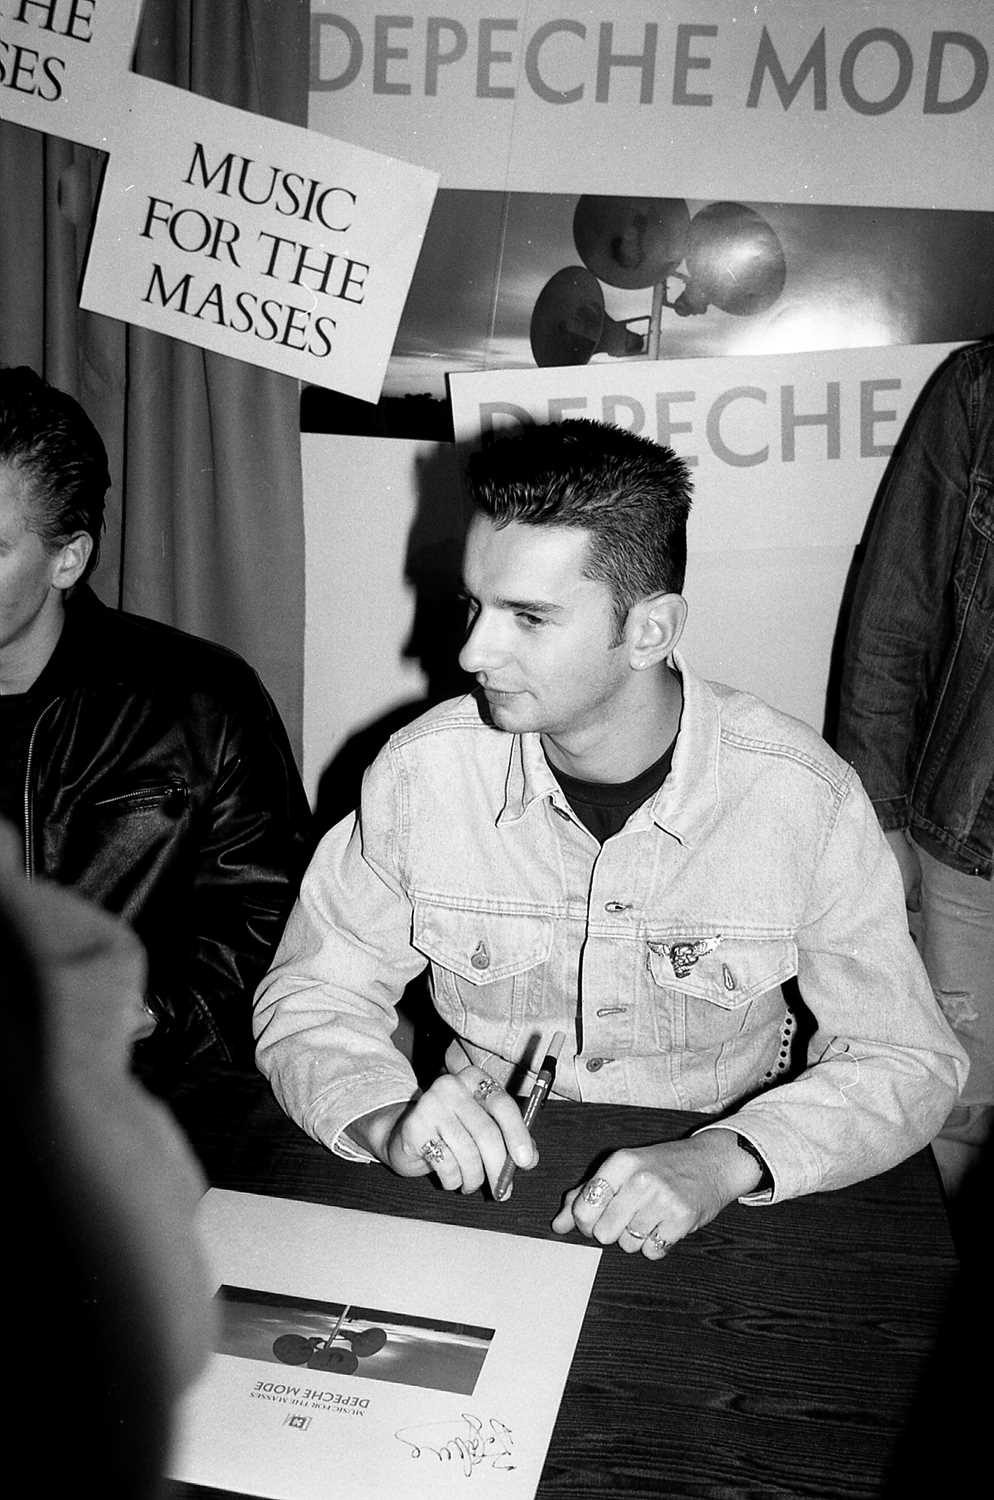 Lot 44 - DEPECHE MODE NEGATIVES - WITH COPYRIGHT